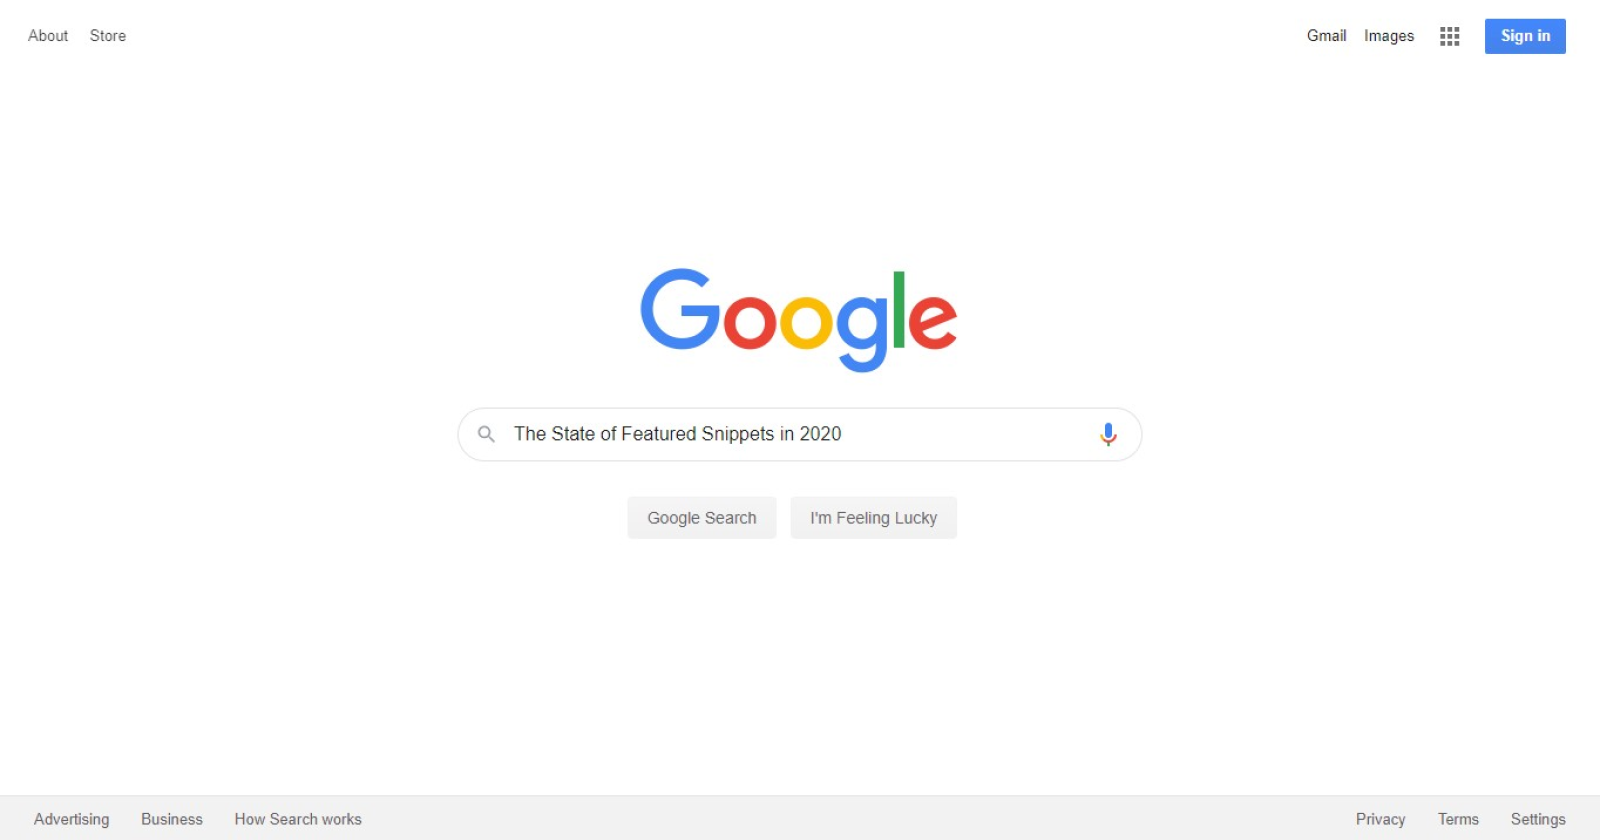 The State of Featured Snippets in 2020